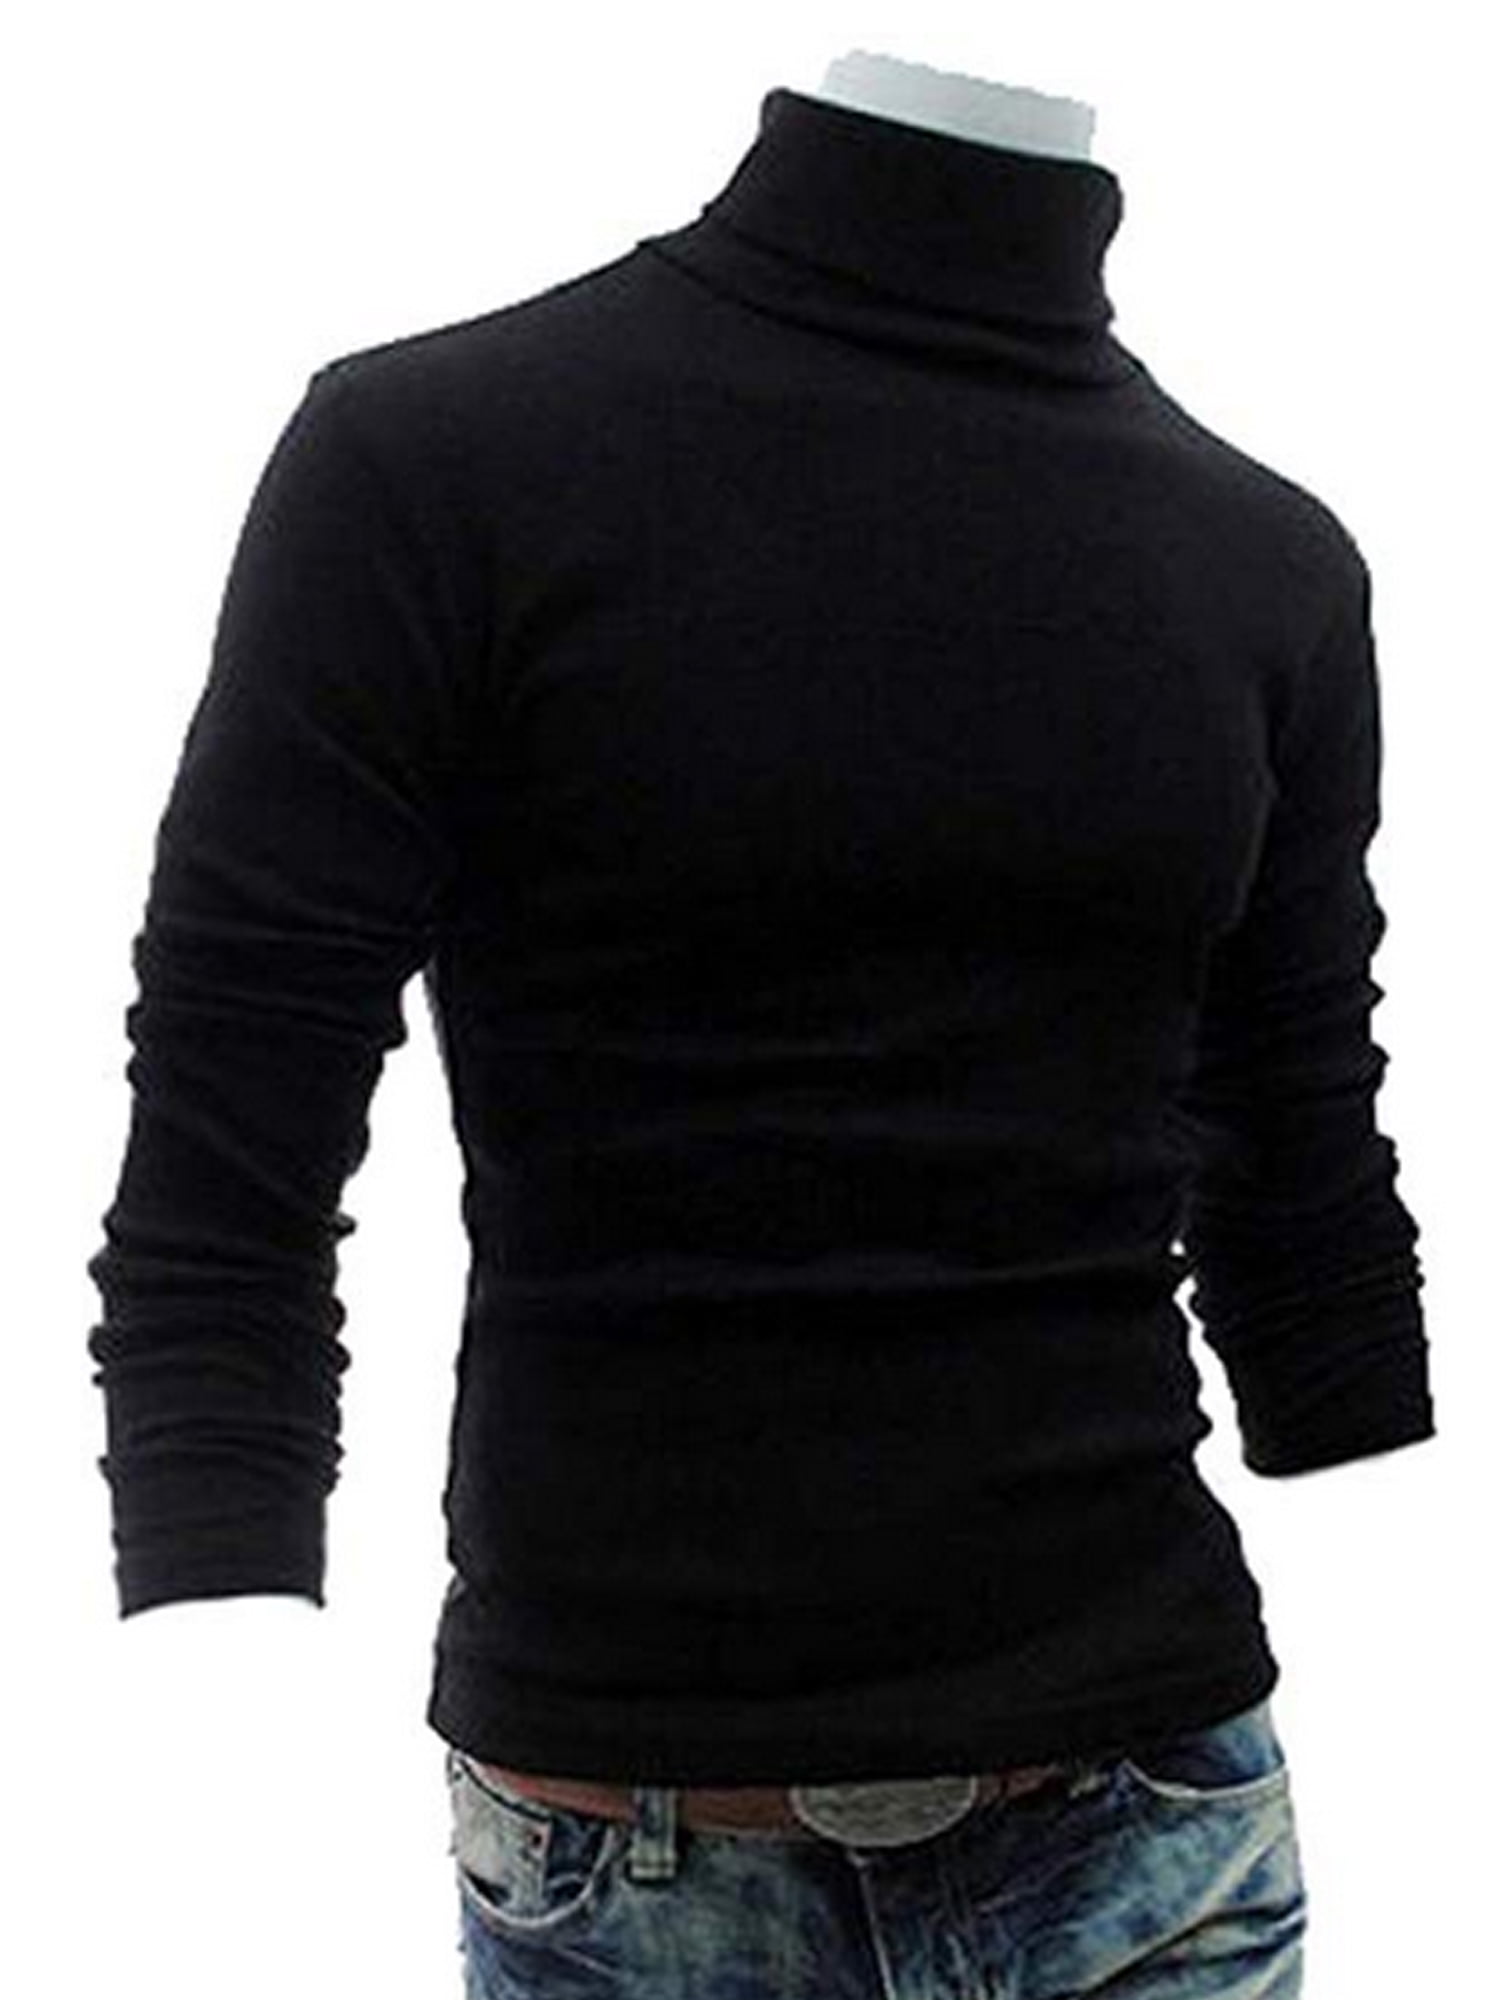 GAGA Mens Casual Slim Pullover Thermal Knitted Turtle Neck Long-Sleeved Sweater Tee